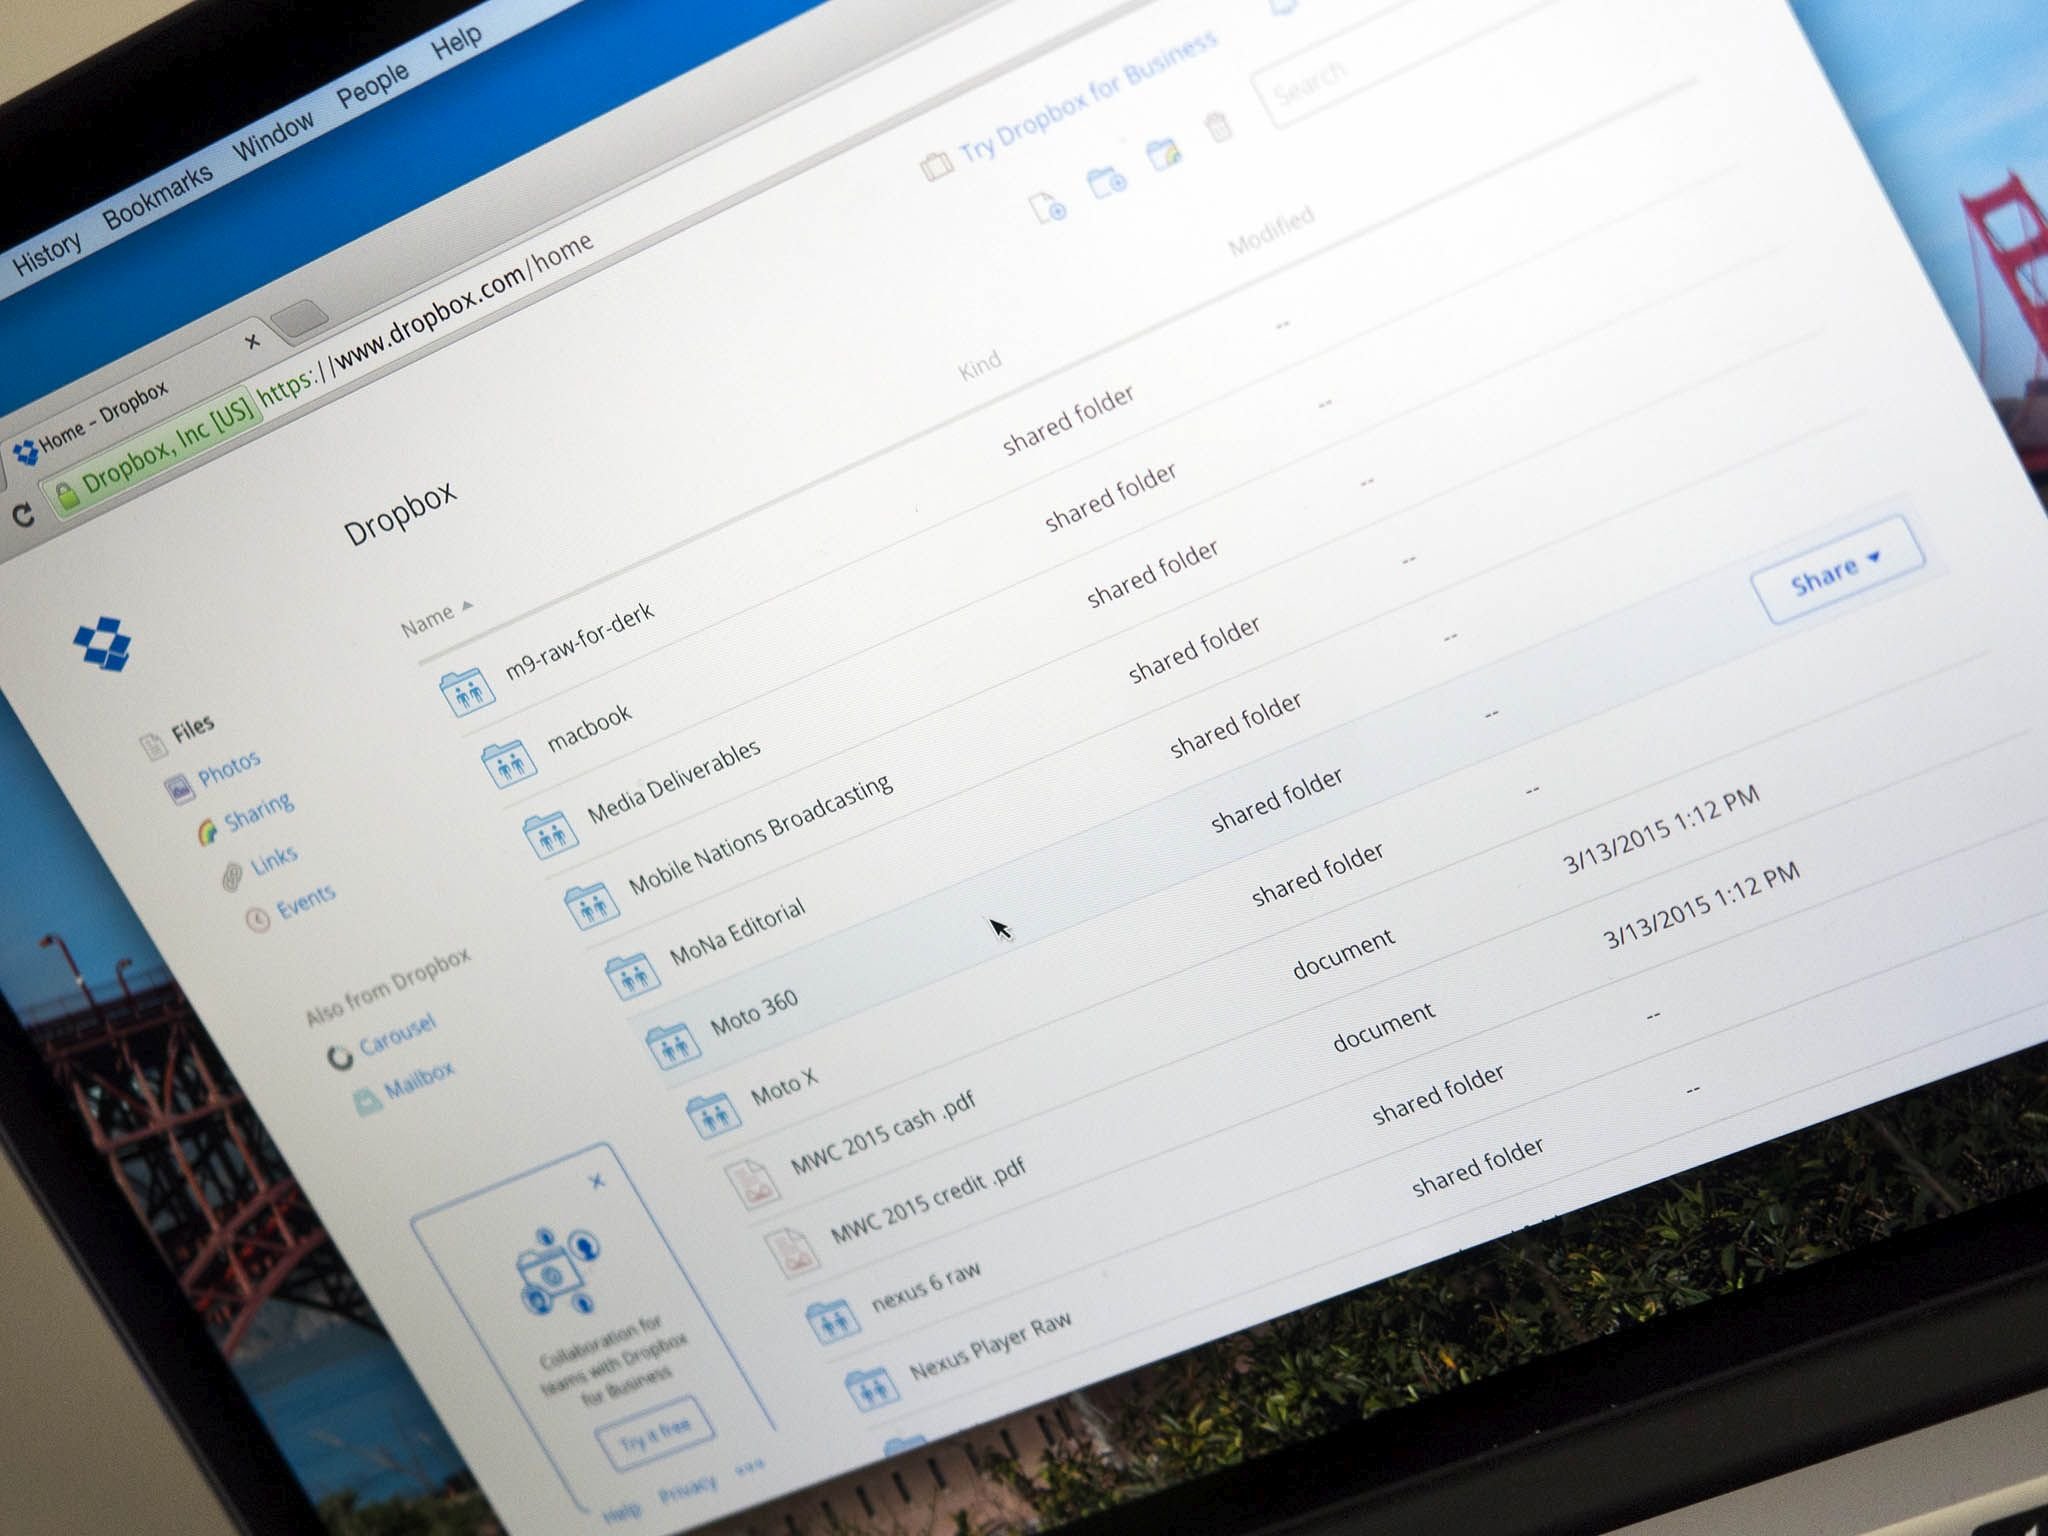 Dropbox will now let you comment on shared files on the web